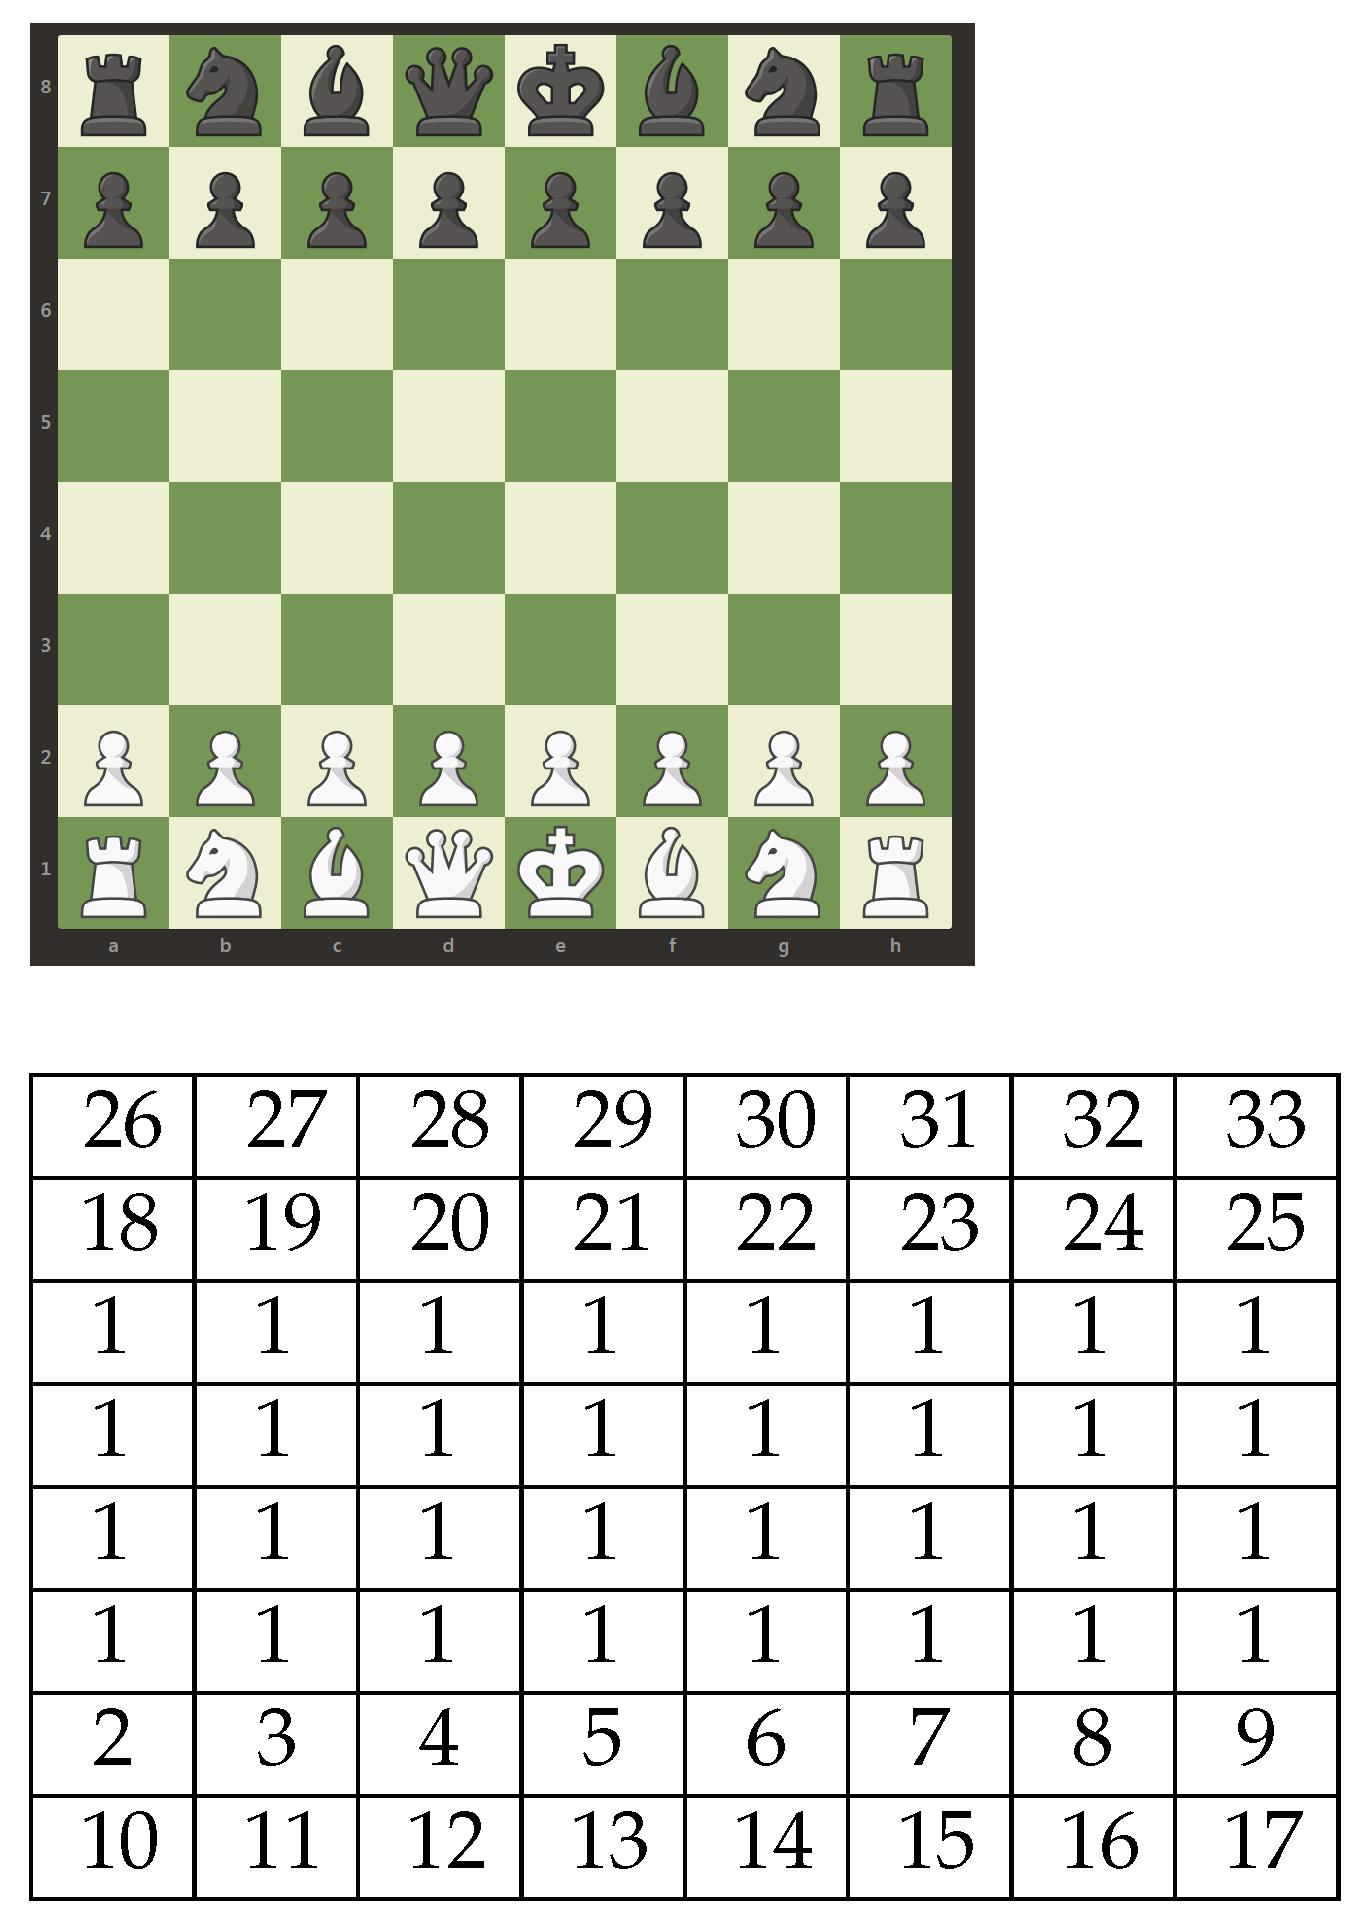 Program for creating an opening tree - Chess Forums 